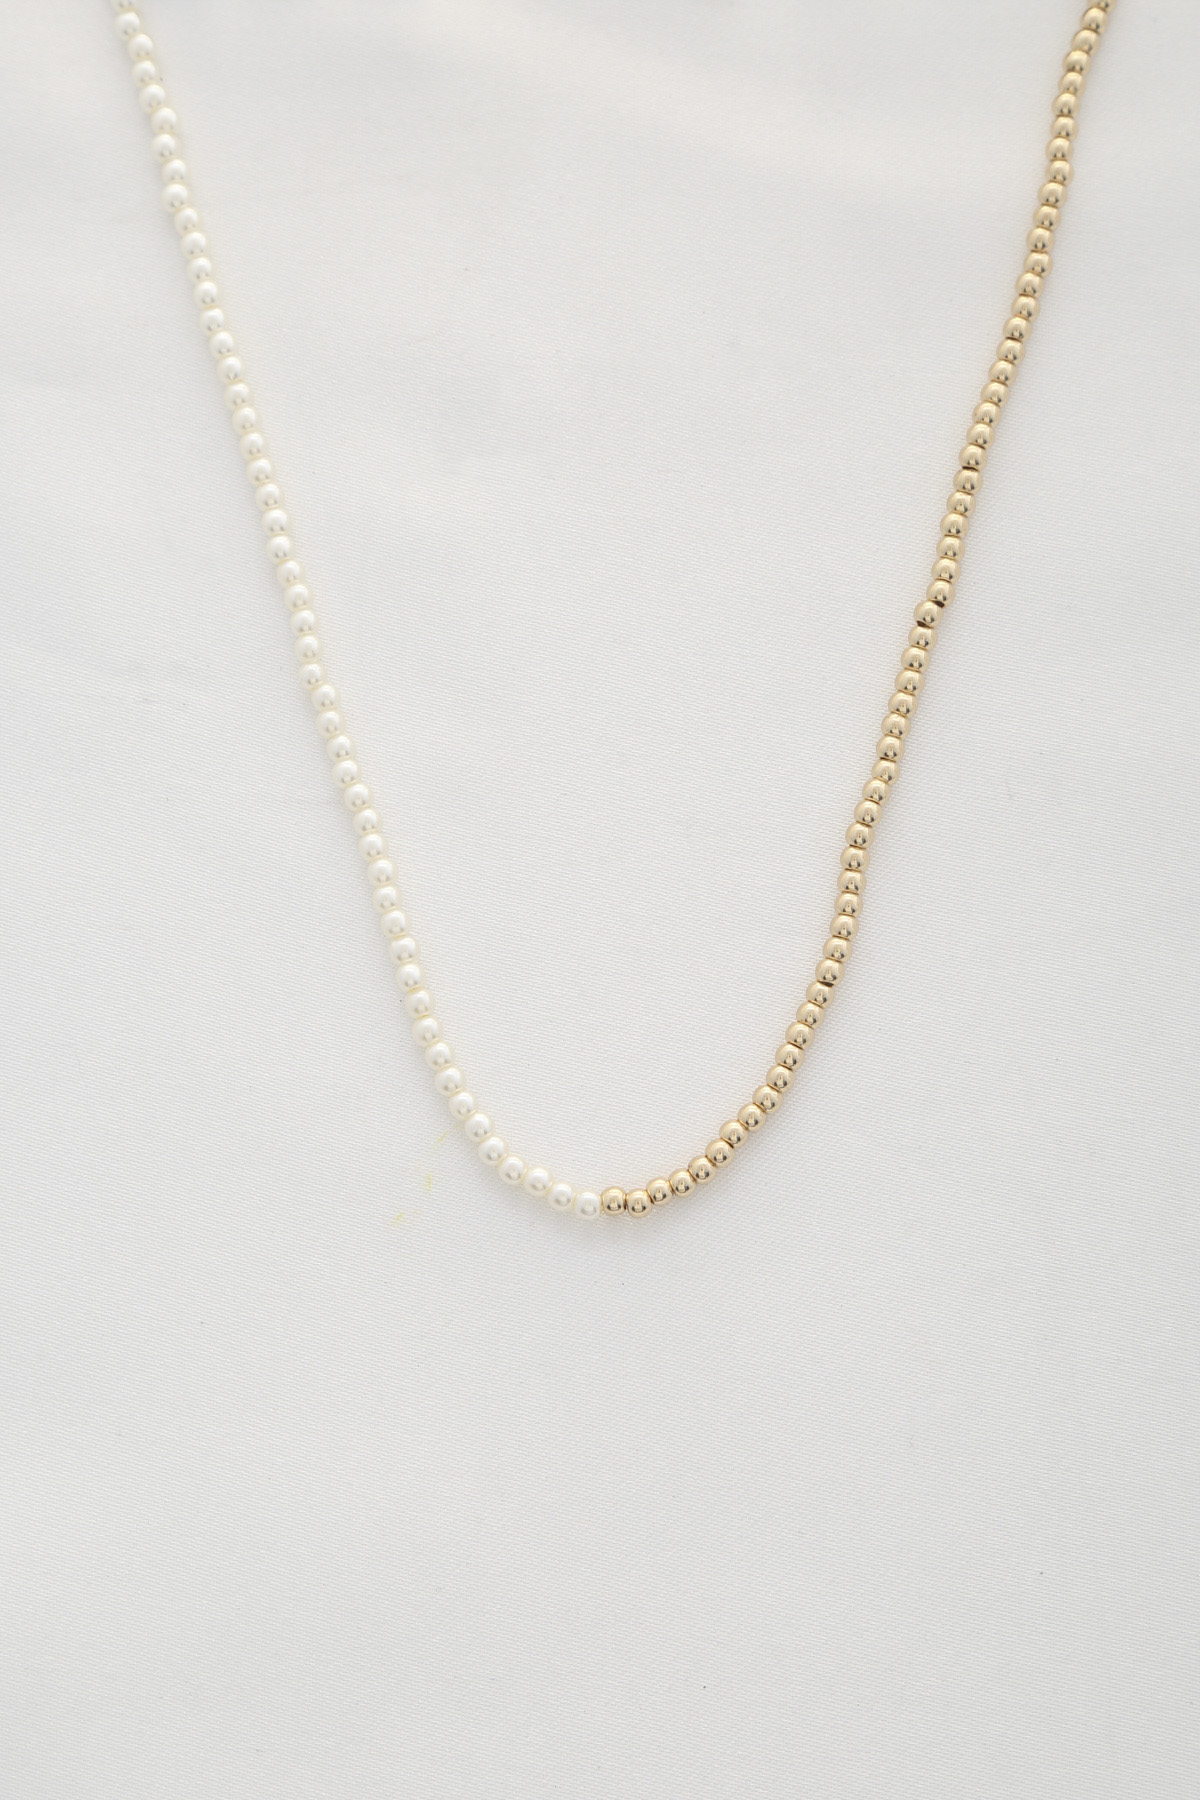 PEARL BALL BEAD NECKLACE